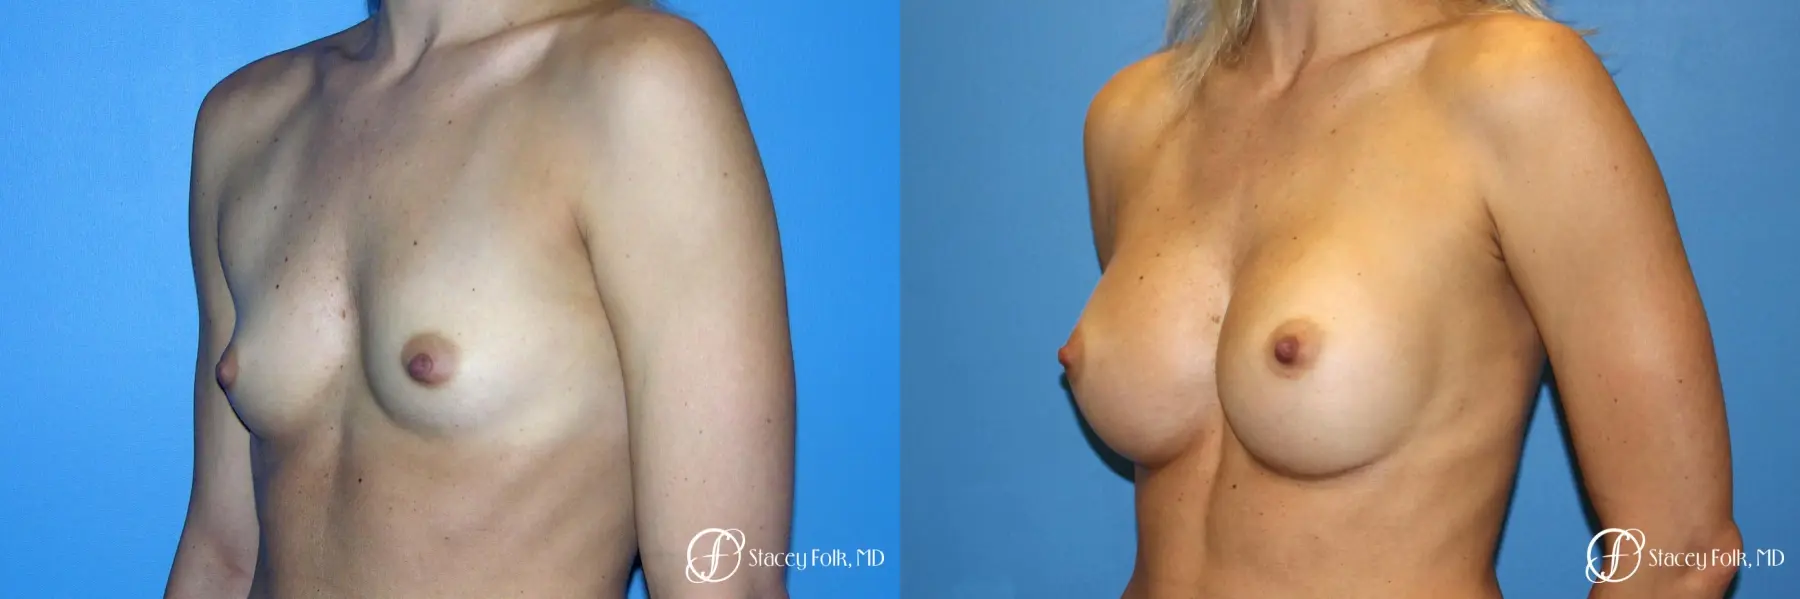 Denver Breast Augmentation 8202 - Before and After 2